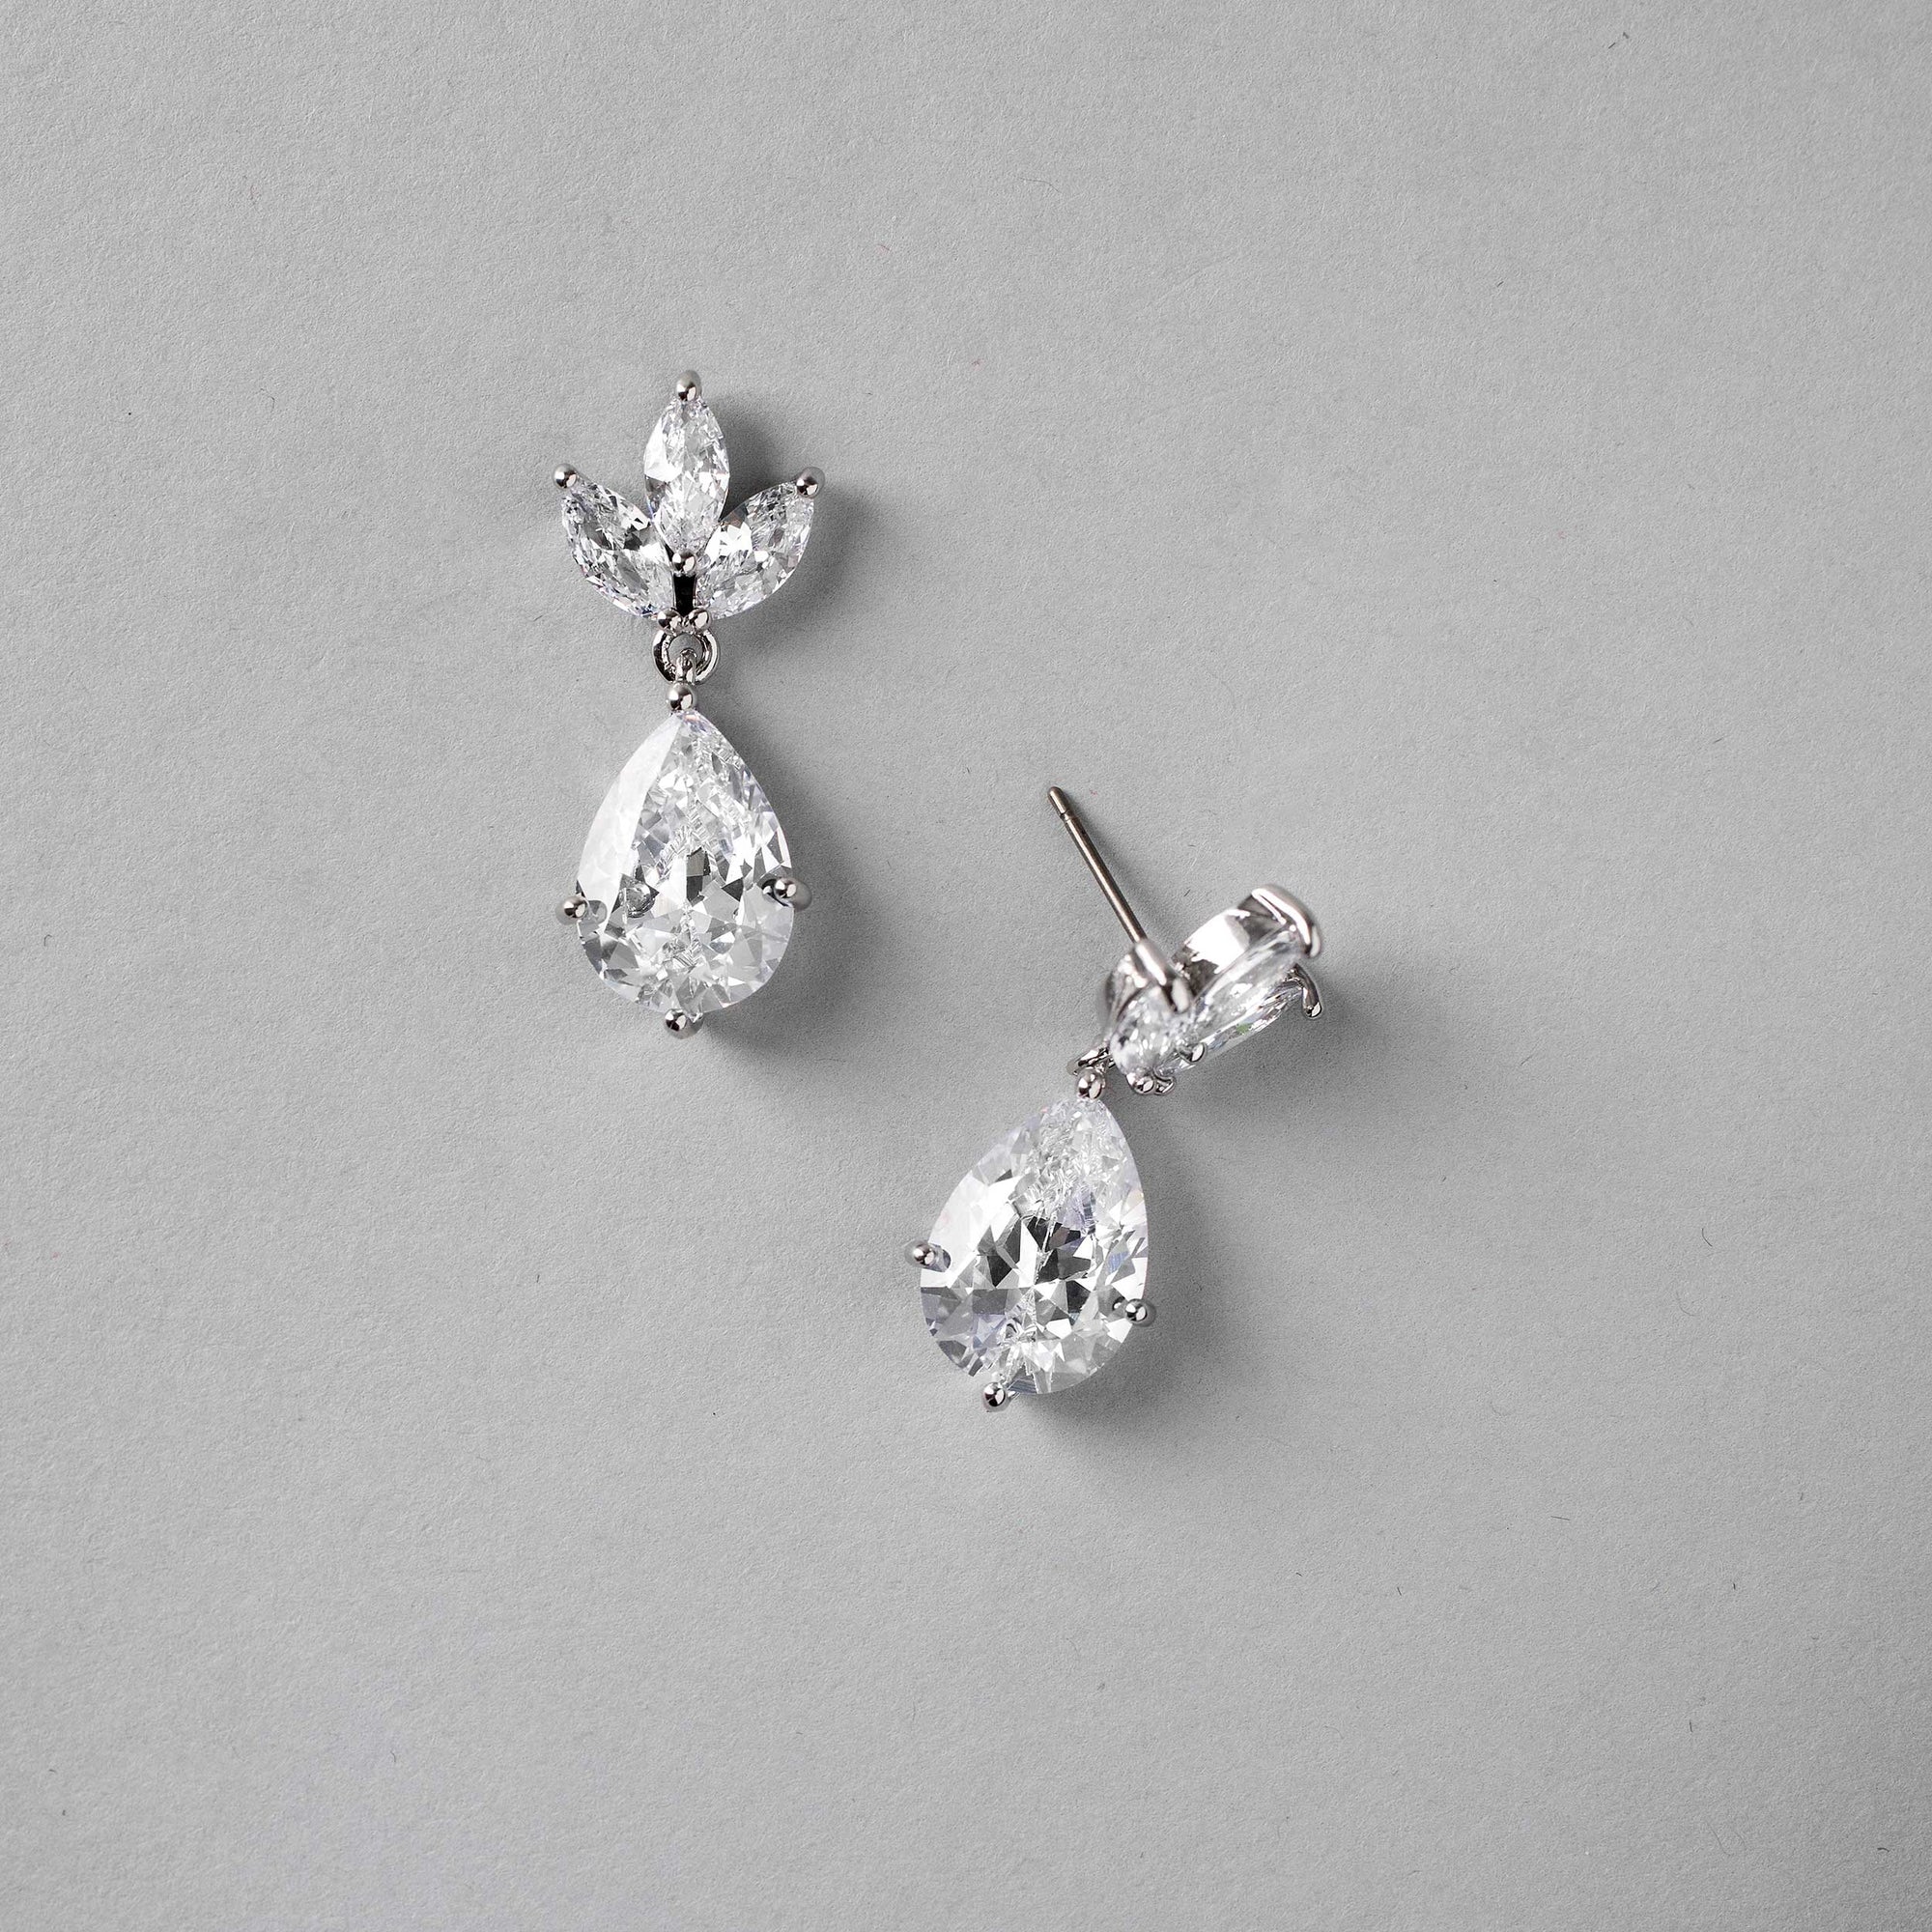 Classic Wedding Earrings with CZ Pear Drop